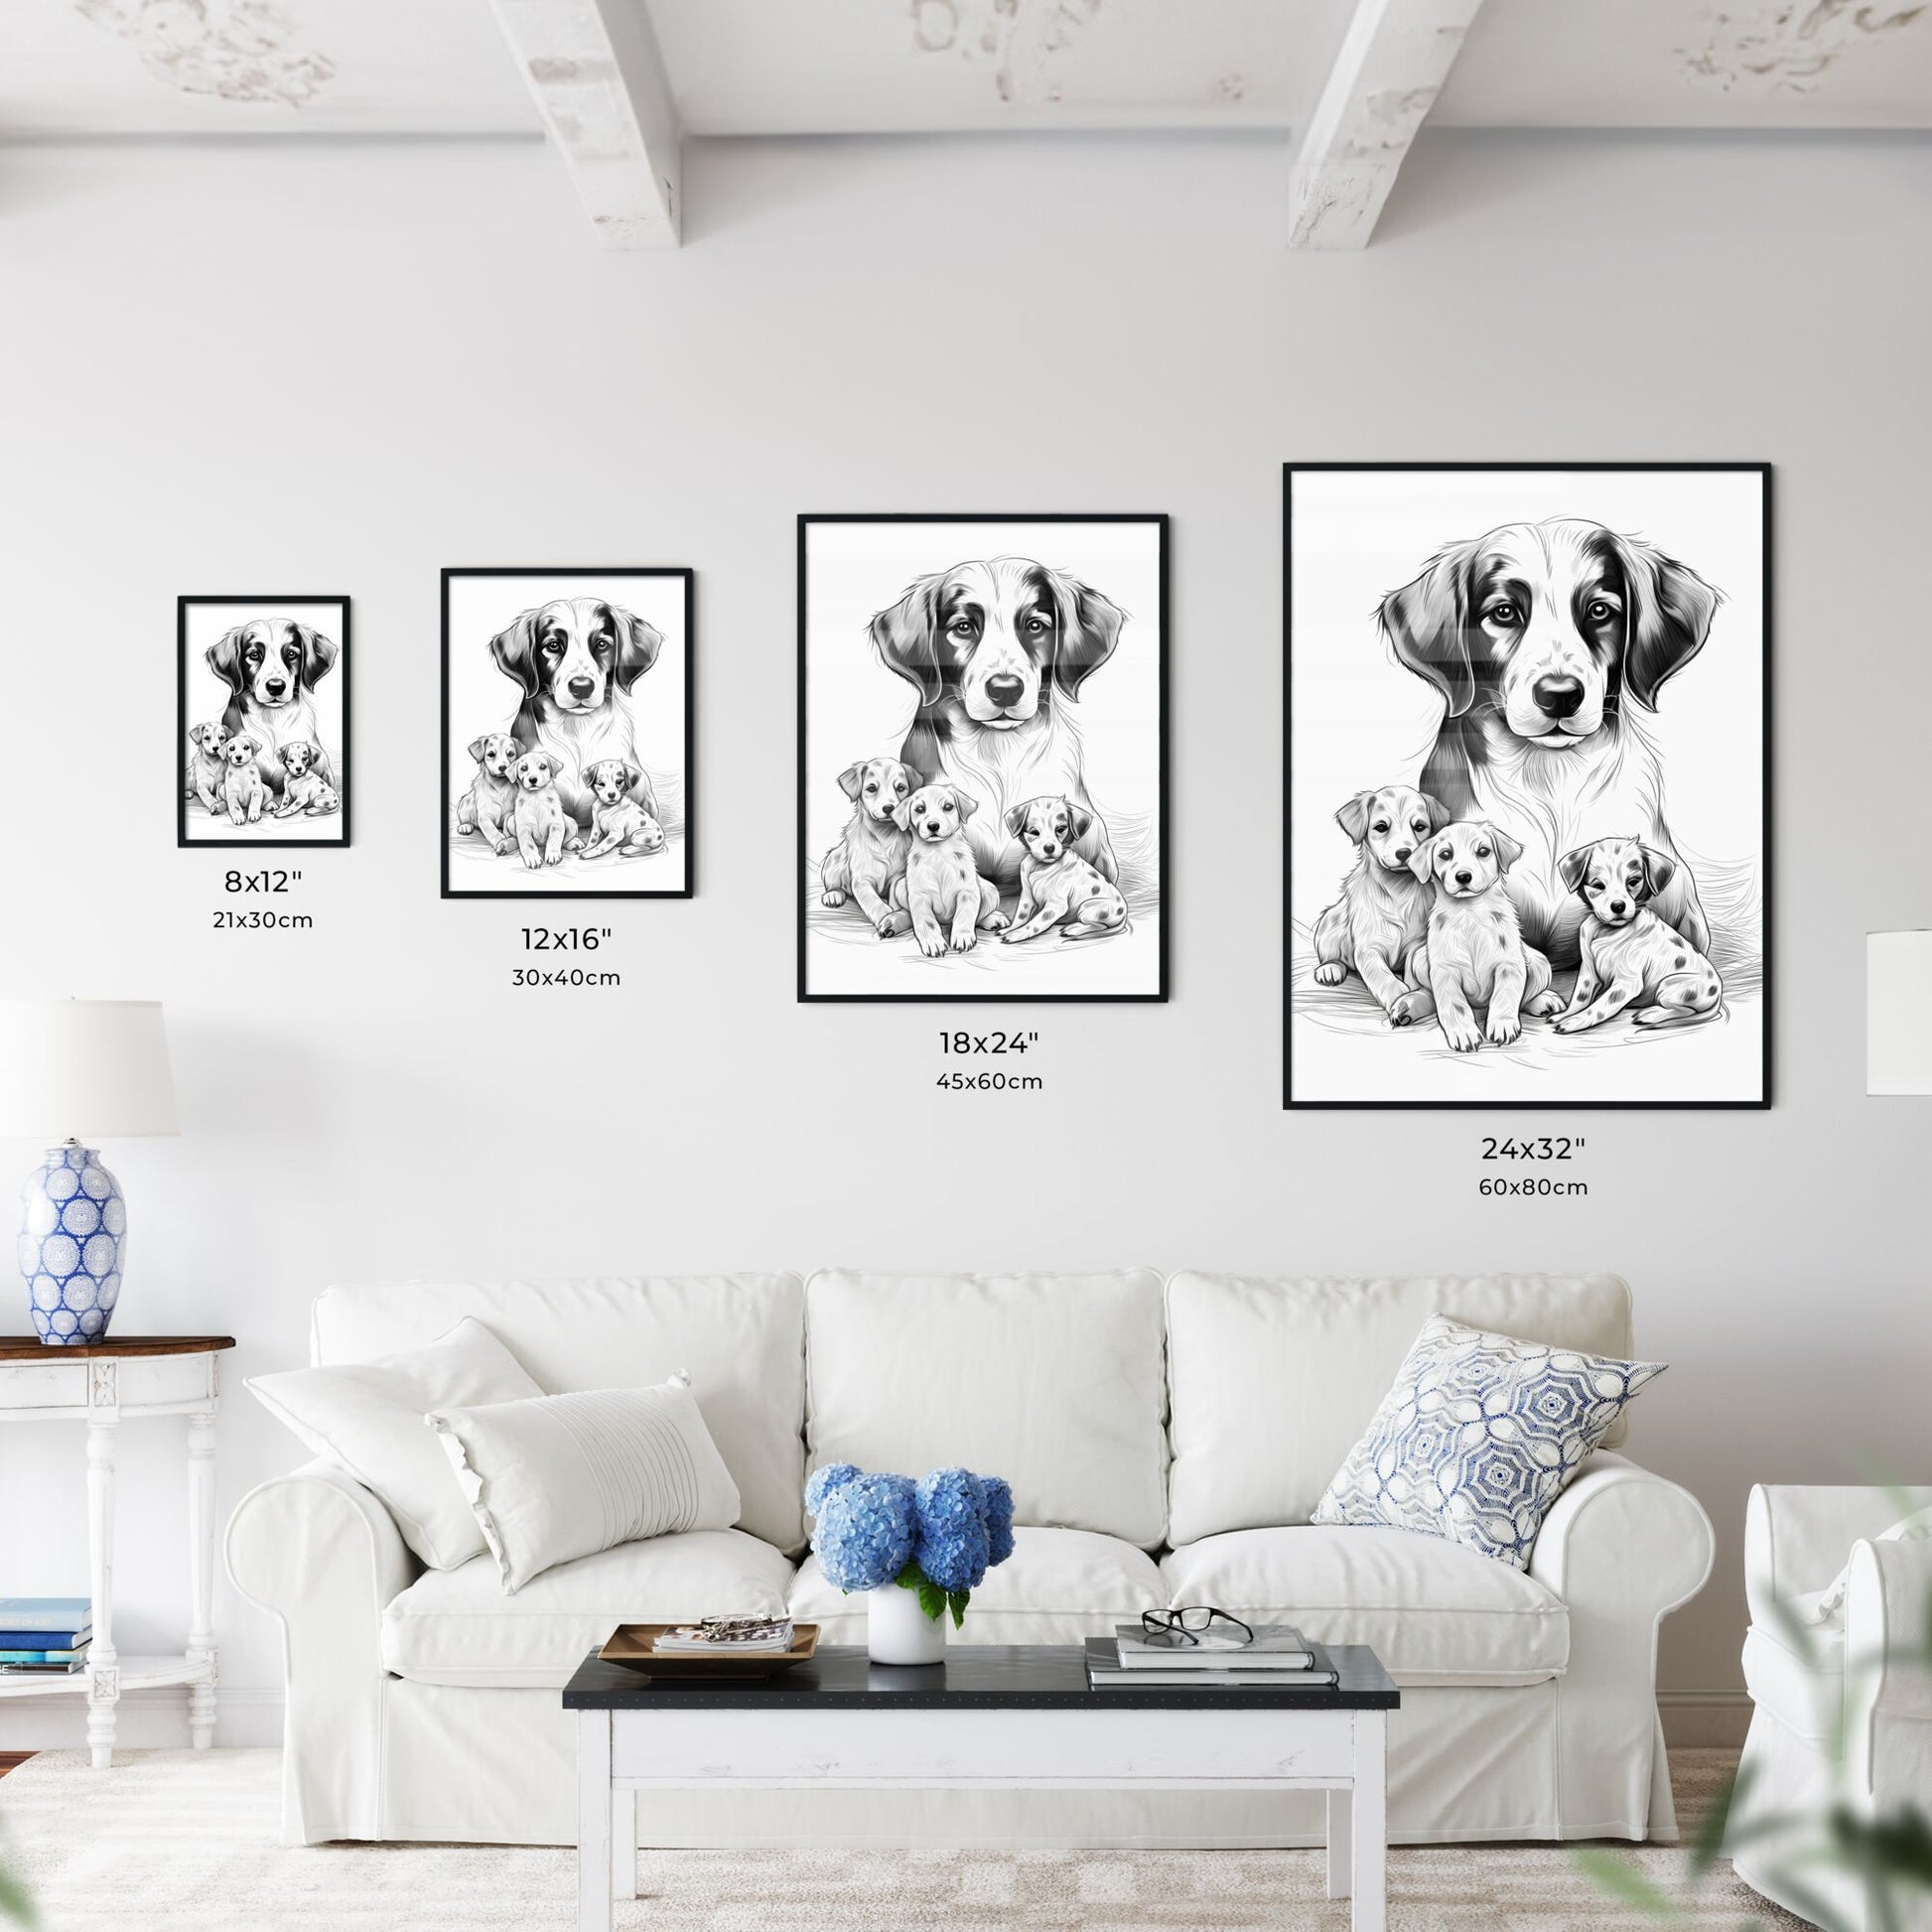 Dog And Puppies Sitting Together Art Print Default Title